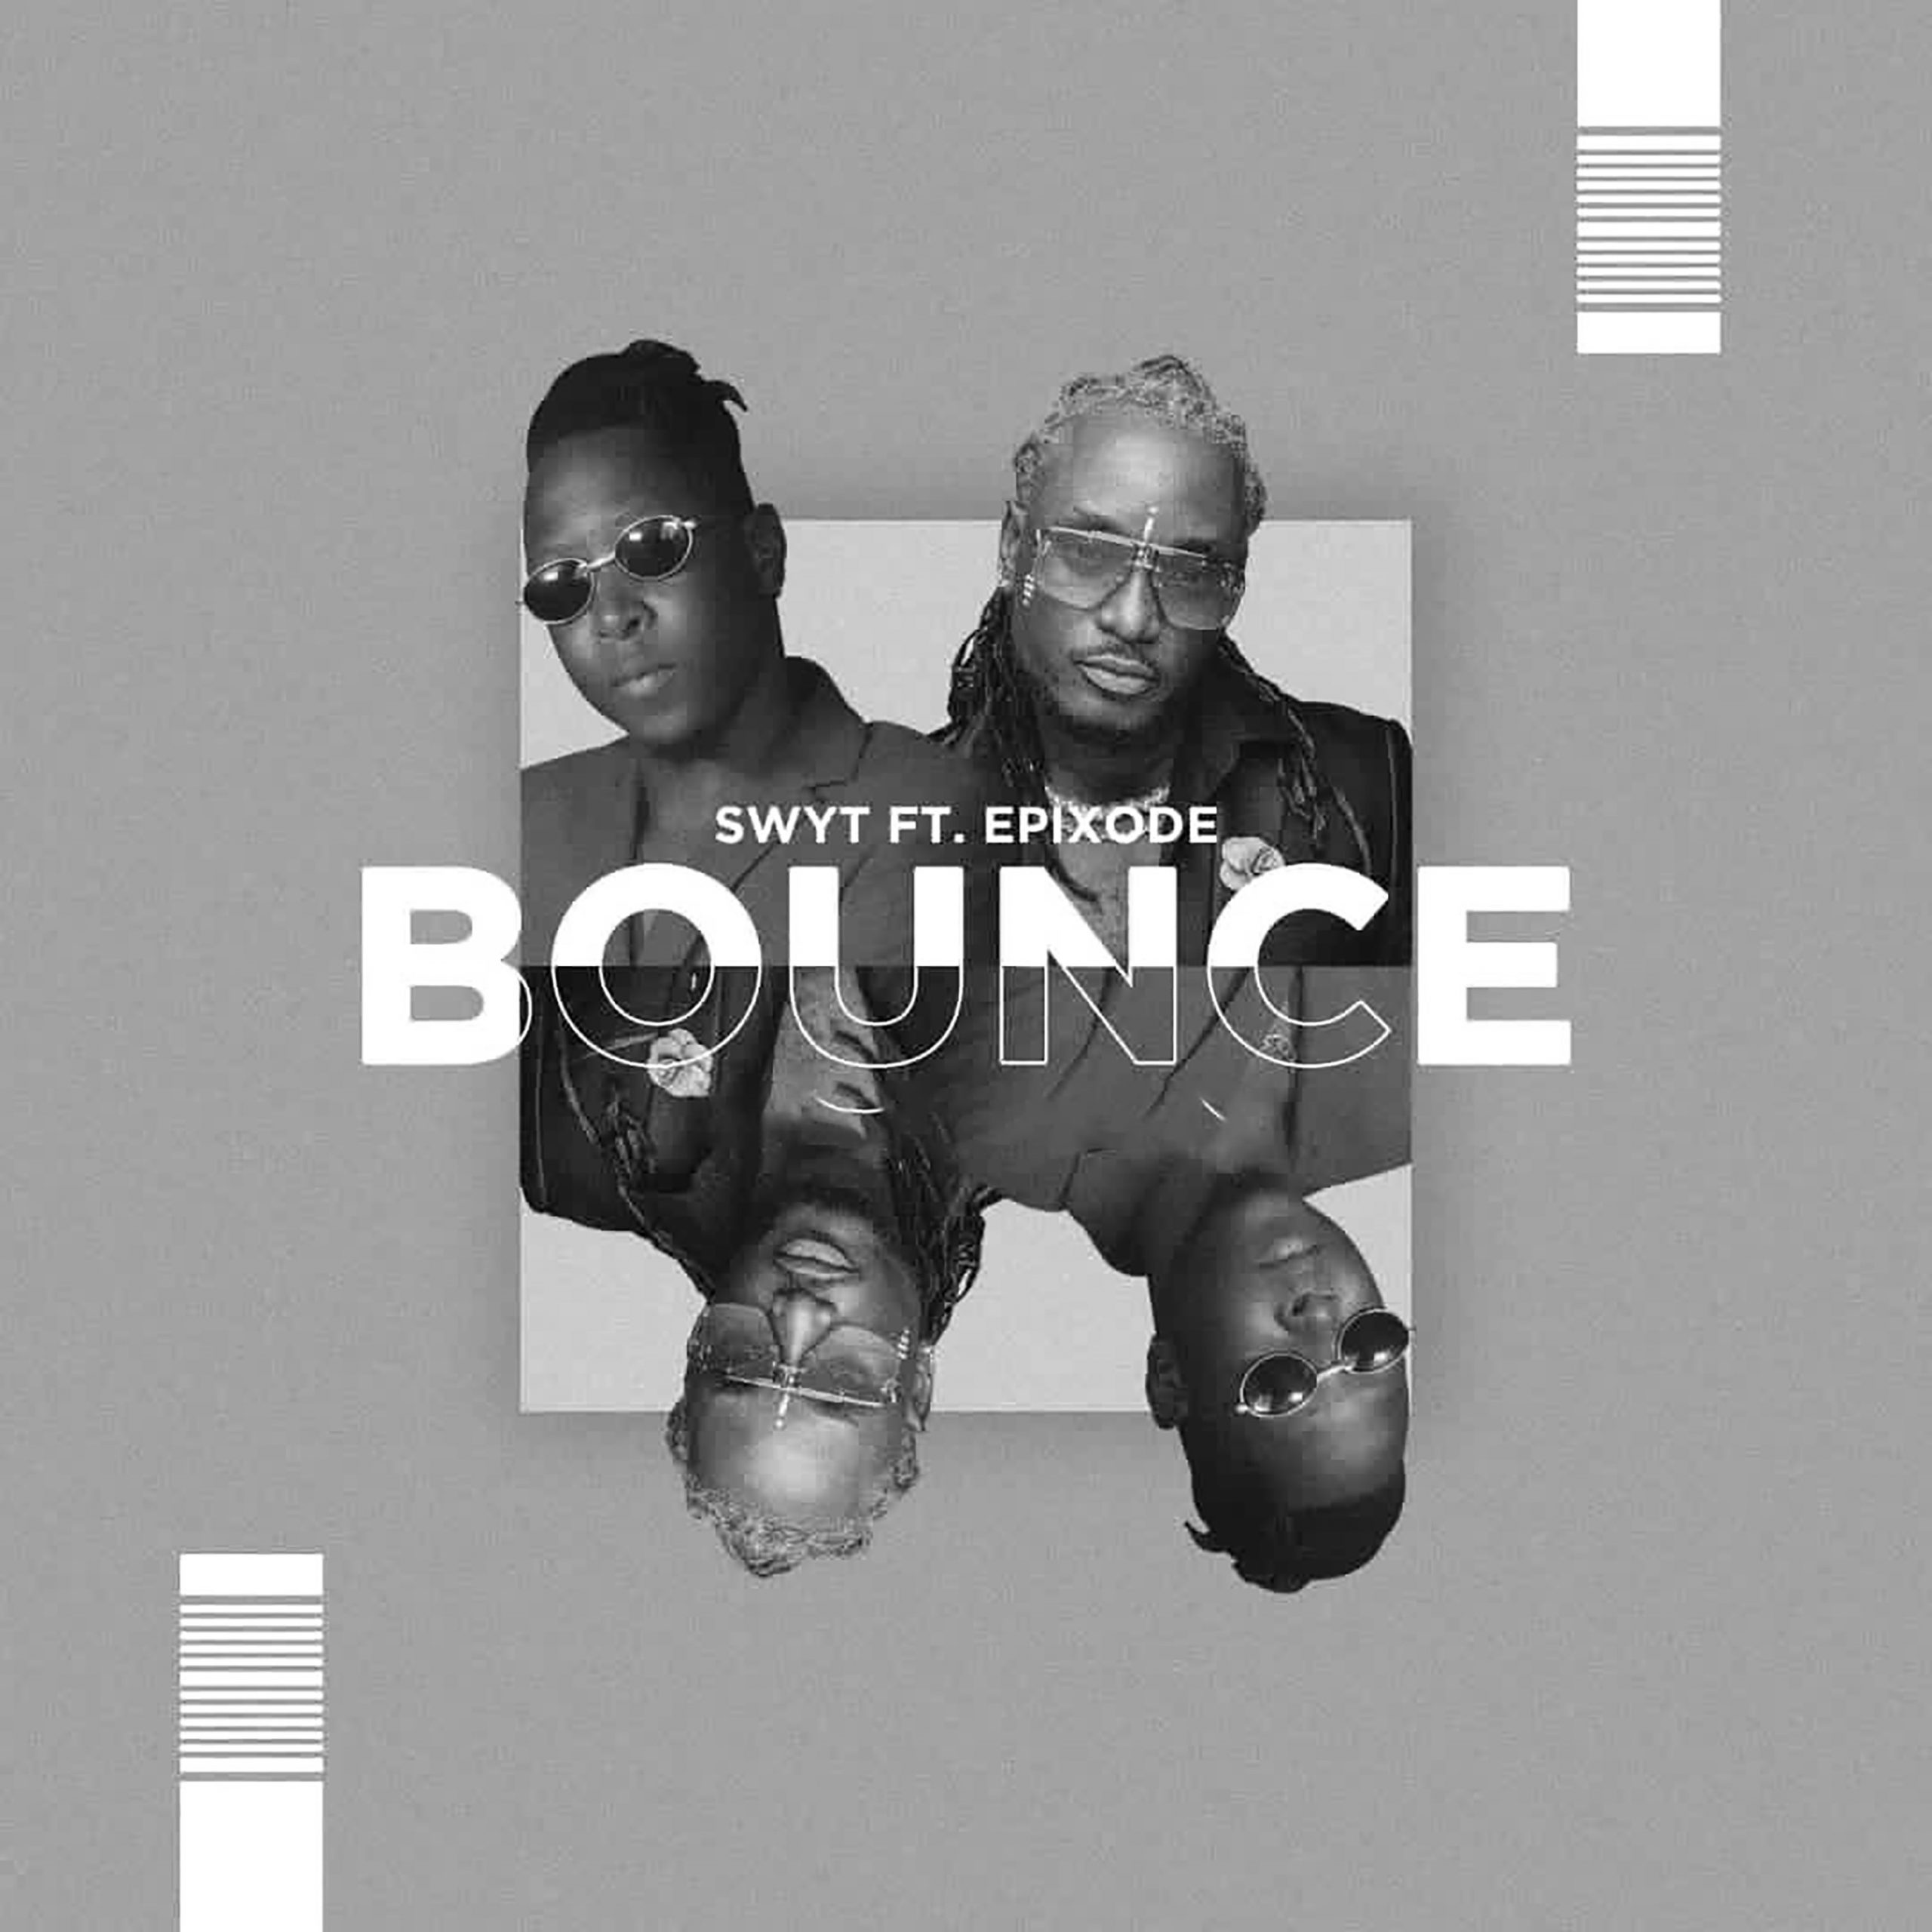 Swyt Drops “BOUNCE” And He Features Epixode.